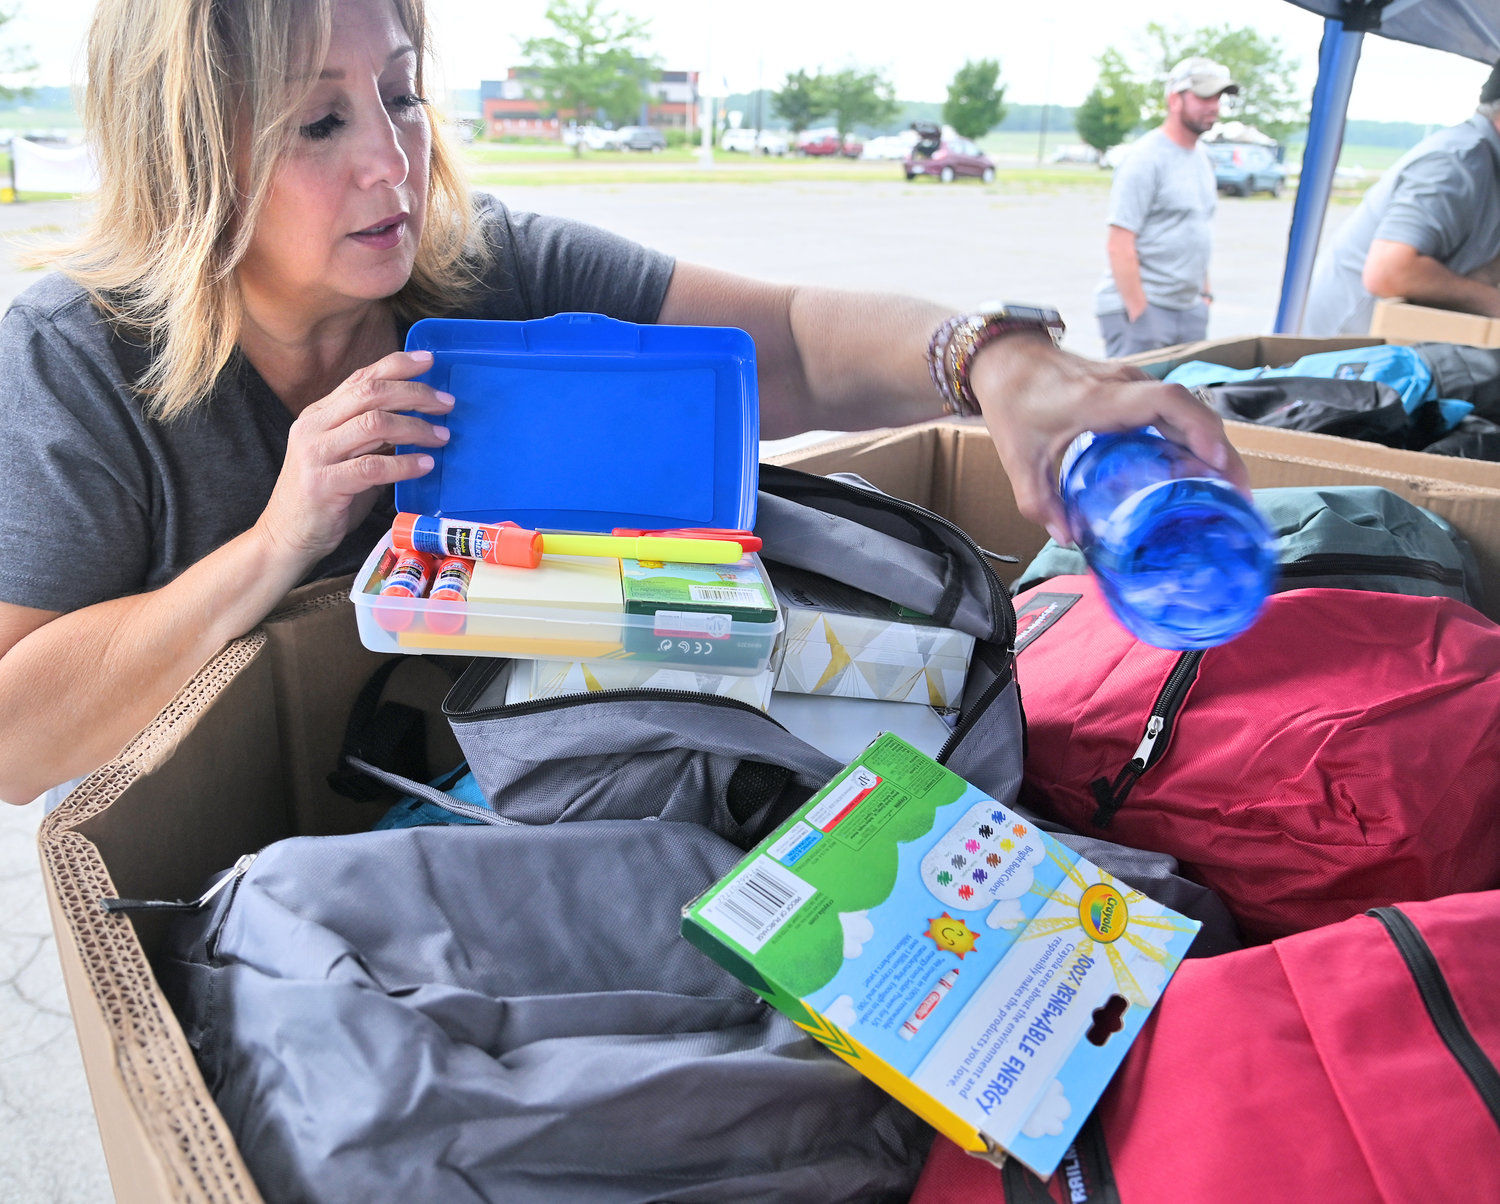 BOOK BAG GIVEAWAY – Wendy Calabrese, director of employee engagement at Kris-Tech and a Kris-Tech Care Team member, shows the contents of one of the 500 book bags that will be given away during Kris-Tech’s Hungry for Education book bag giveaway.